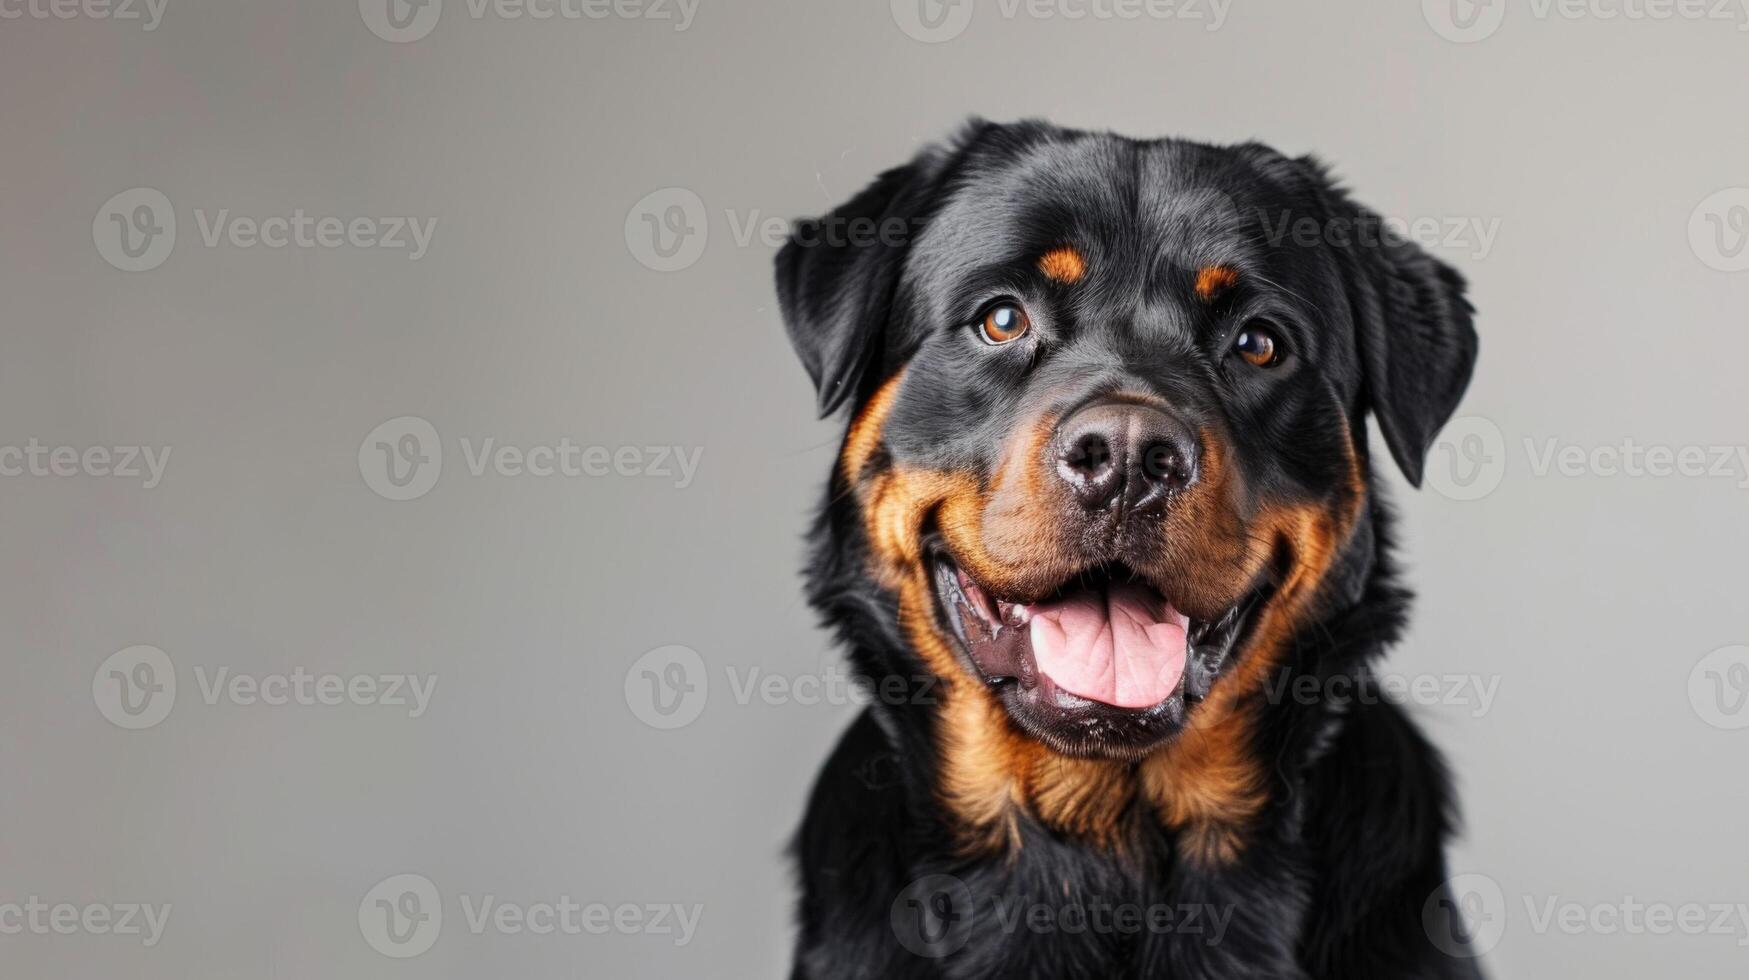 Portrait of a friendly Rottweiler dog with a black and tan coat looking alert and cheerful in a studio setting photo